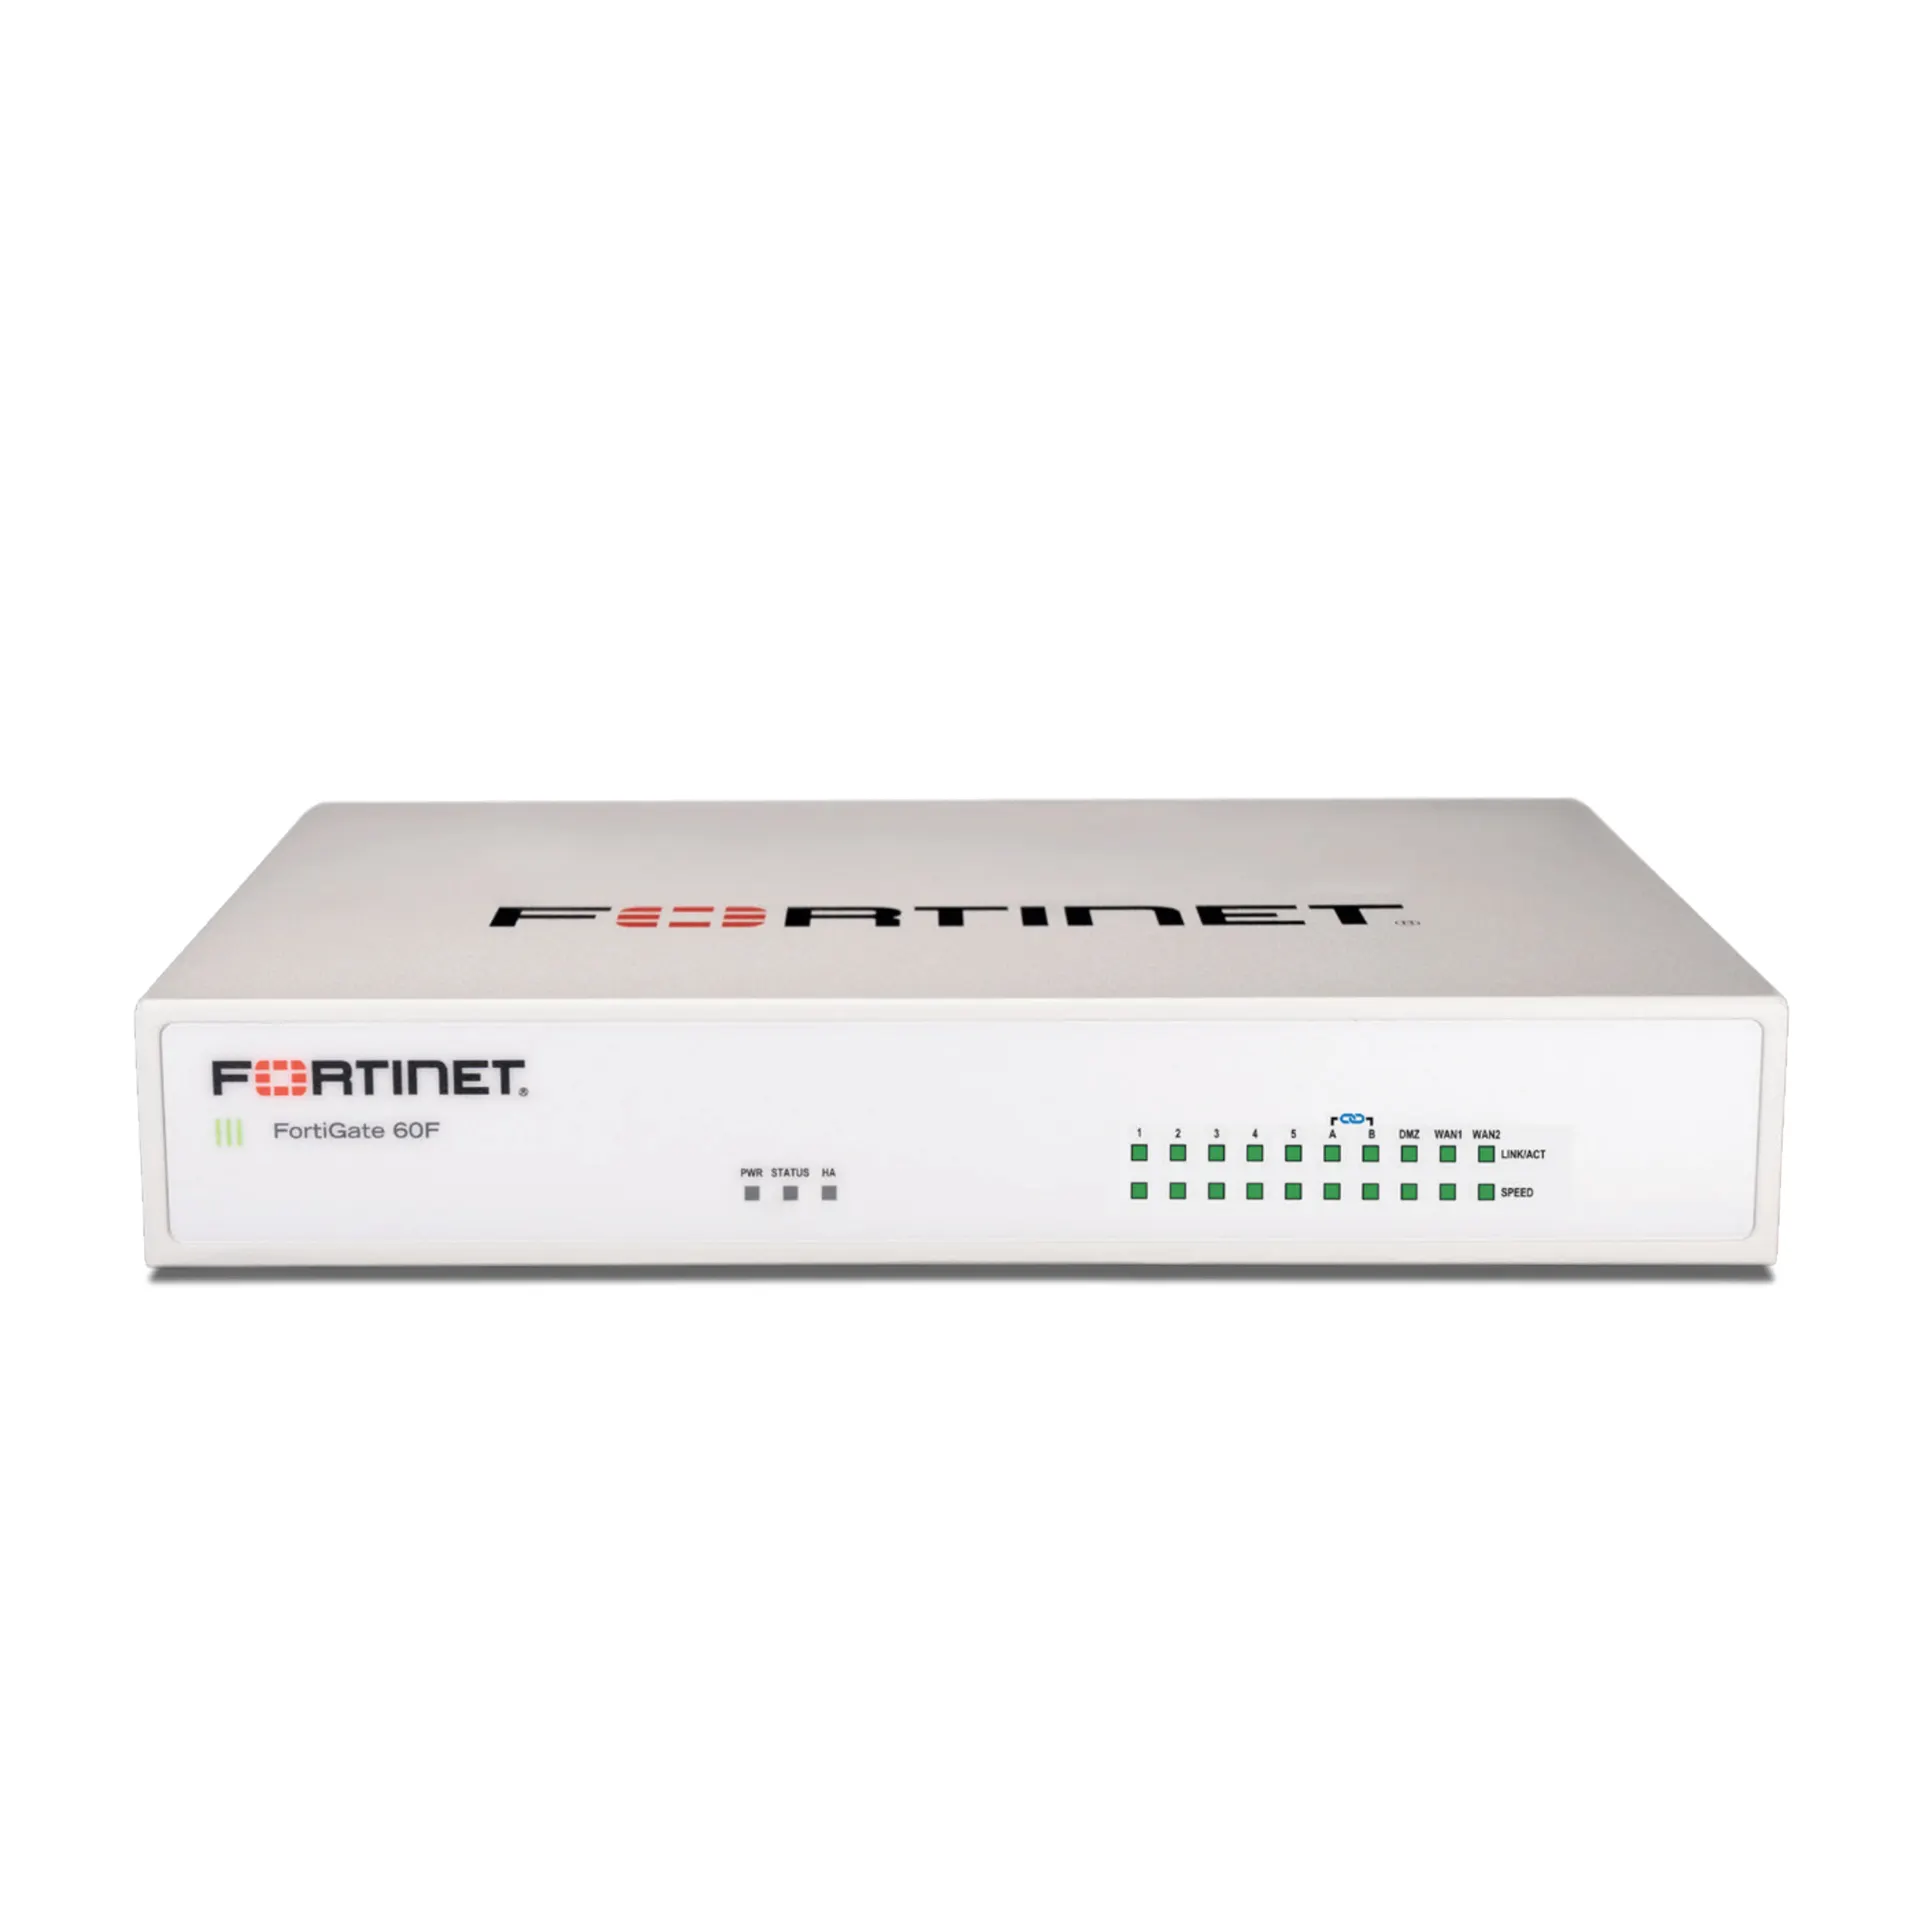 Fortinet Firewall-FG-60F-BDL-950-12 FG-60F Fortigate 60F und Software lizenz Unified Threat Protection (UTP) FortiCare